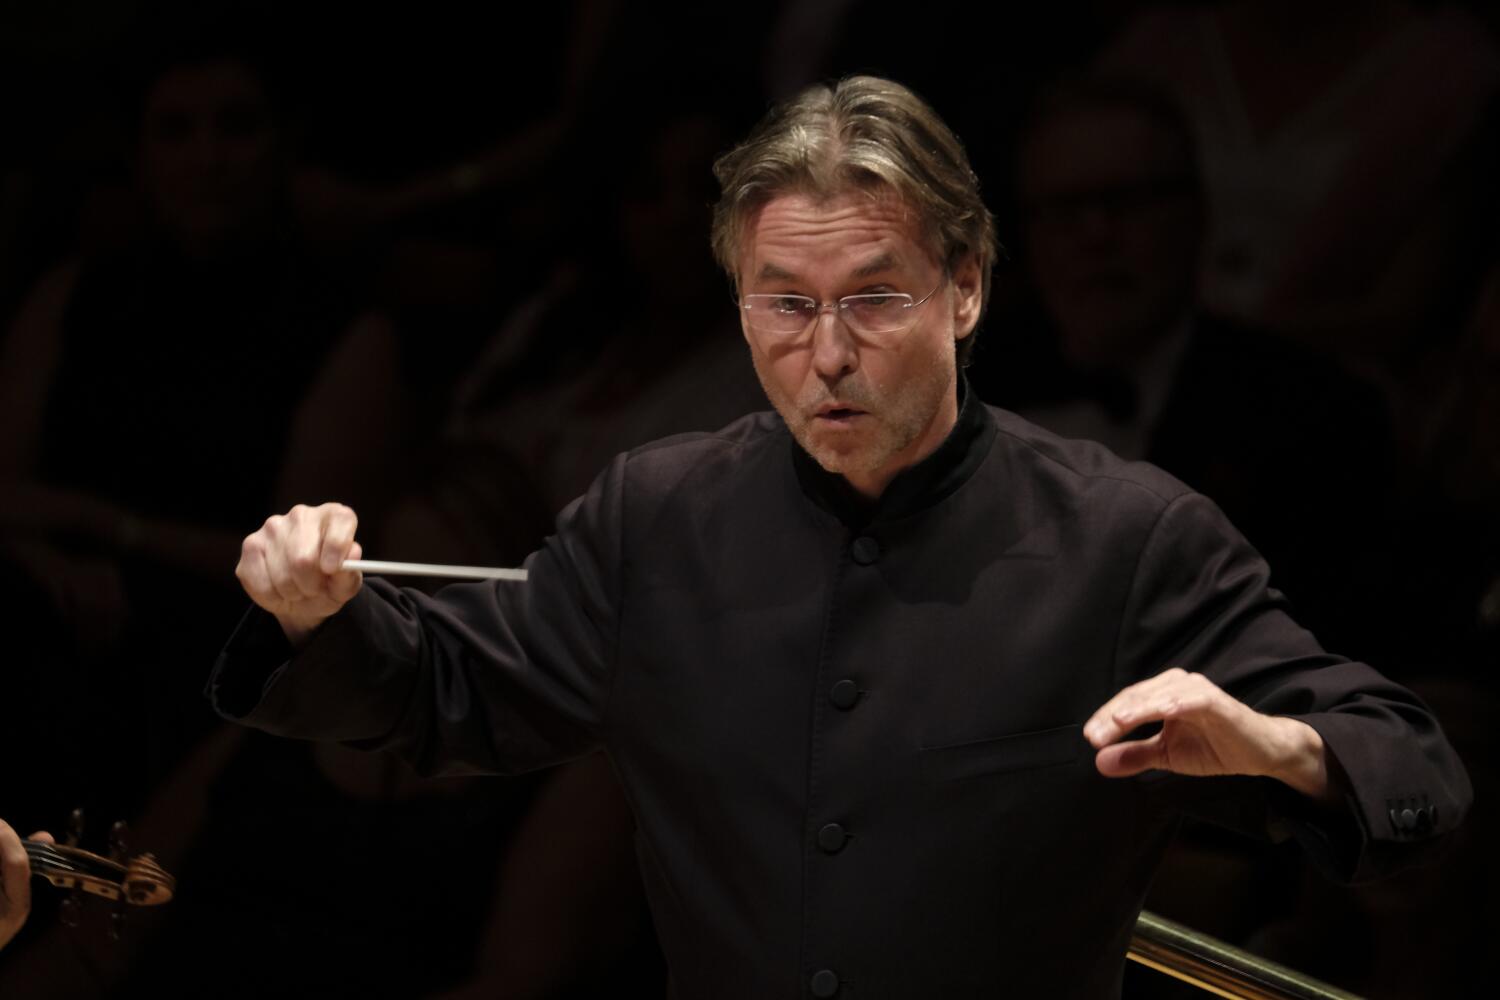 Esa-Pekka Salonen's resignation in San Francisco is a wake-up call for arts groups nationwide